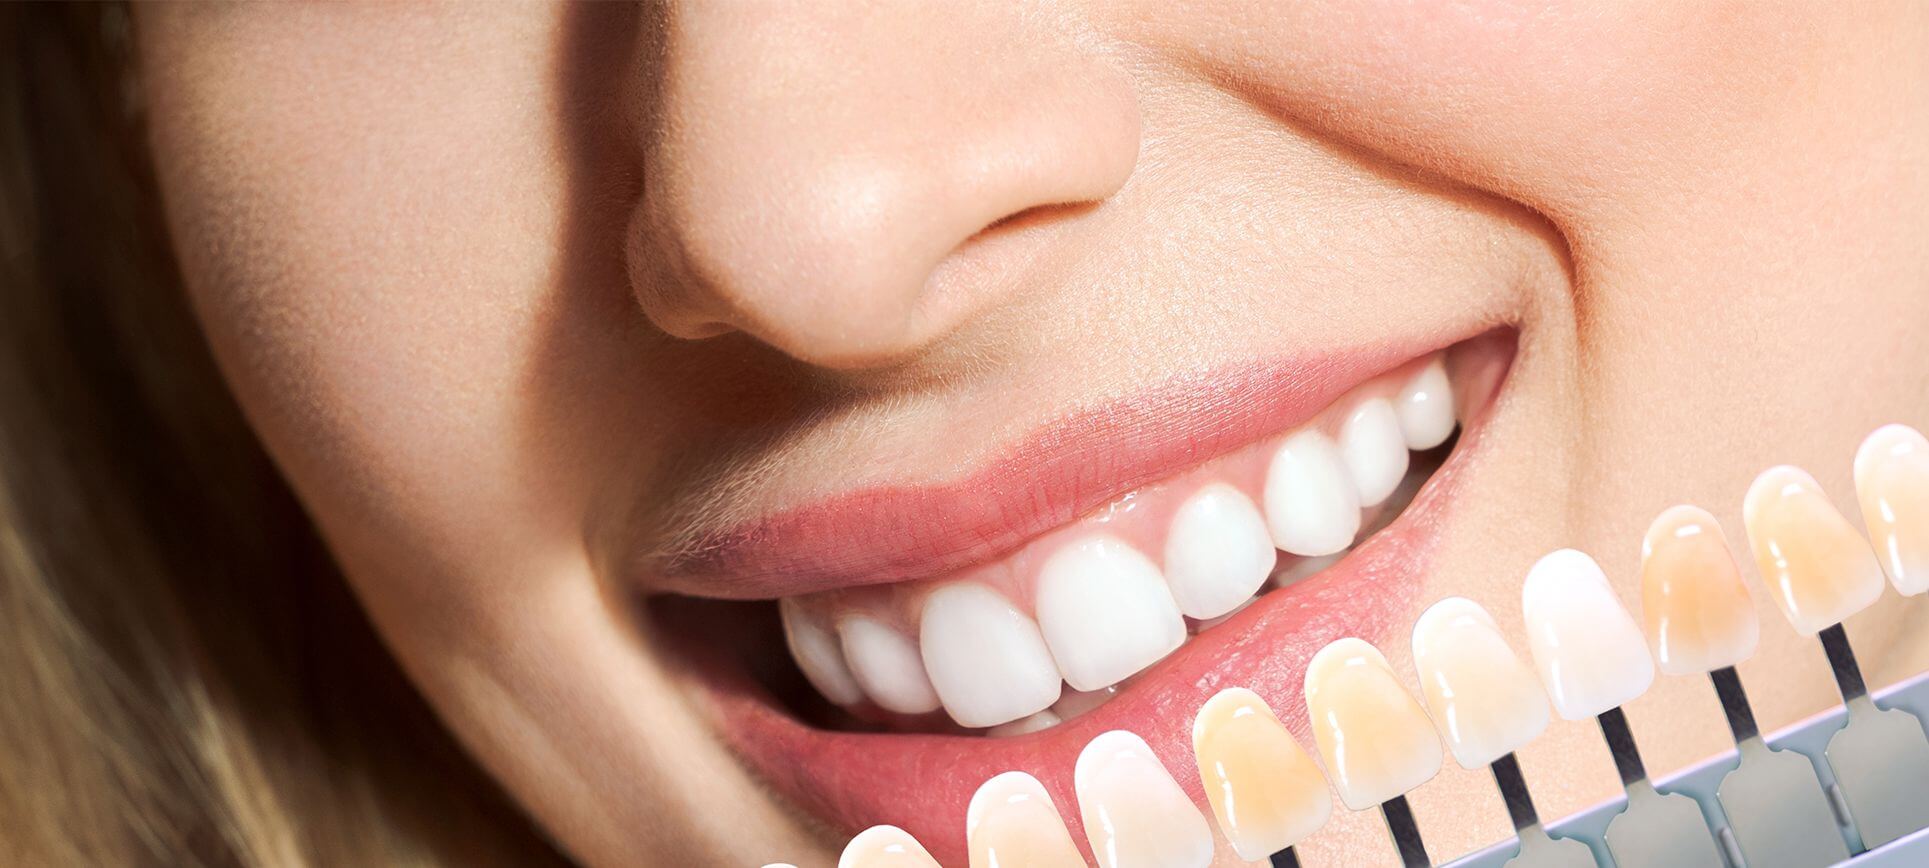 cosmetic dentistry in thornhill